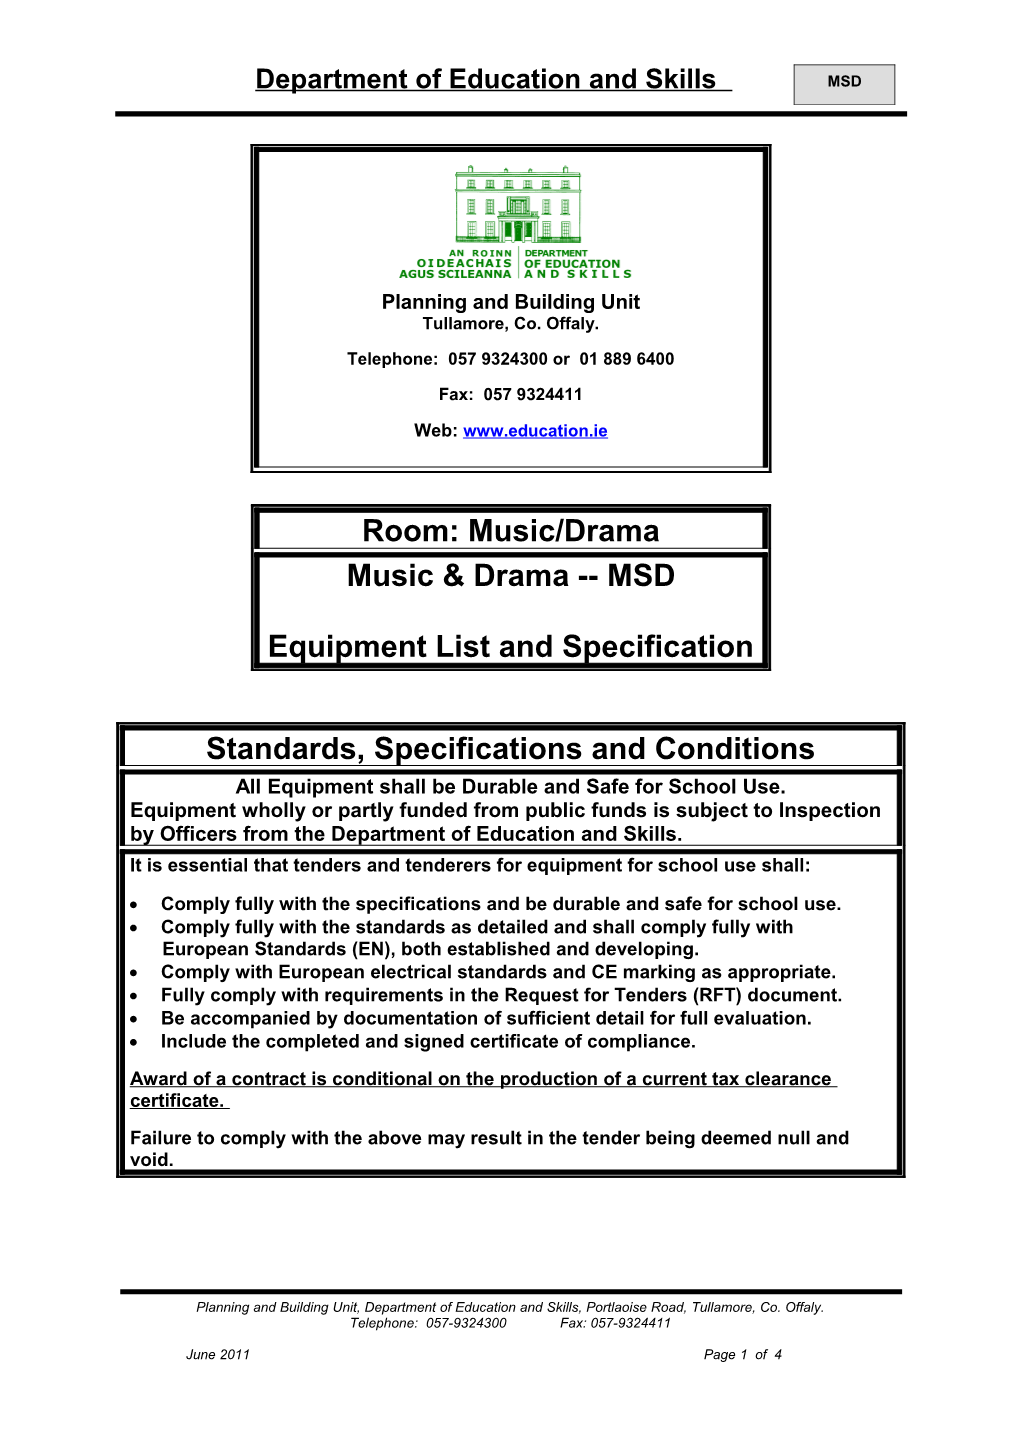 Room: Music/Drama - Music & Drama - MSD - Equipment List and Specification (File Format